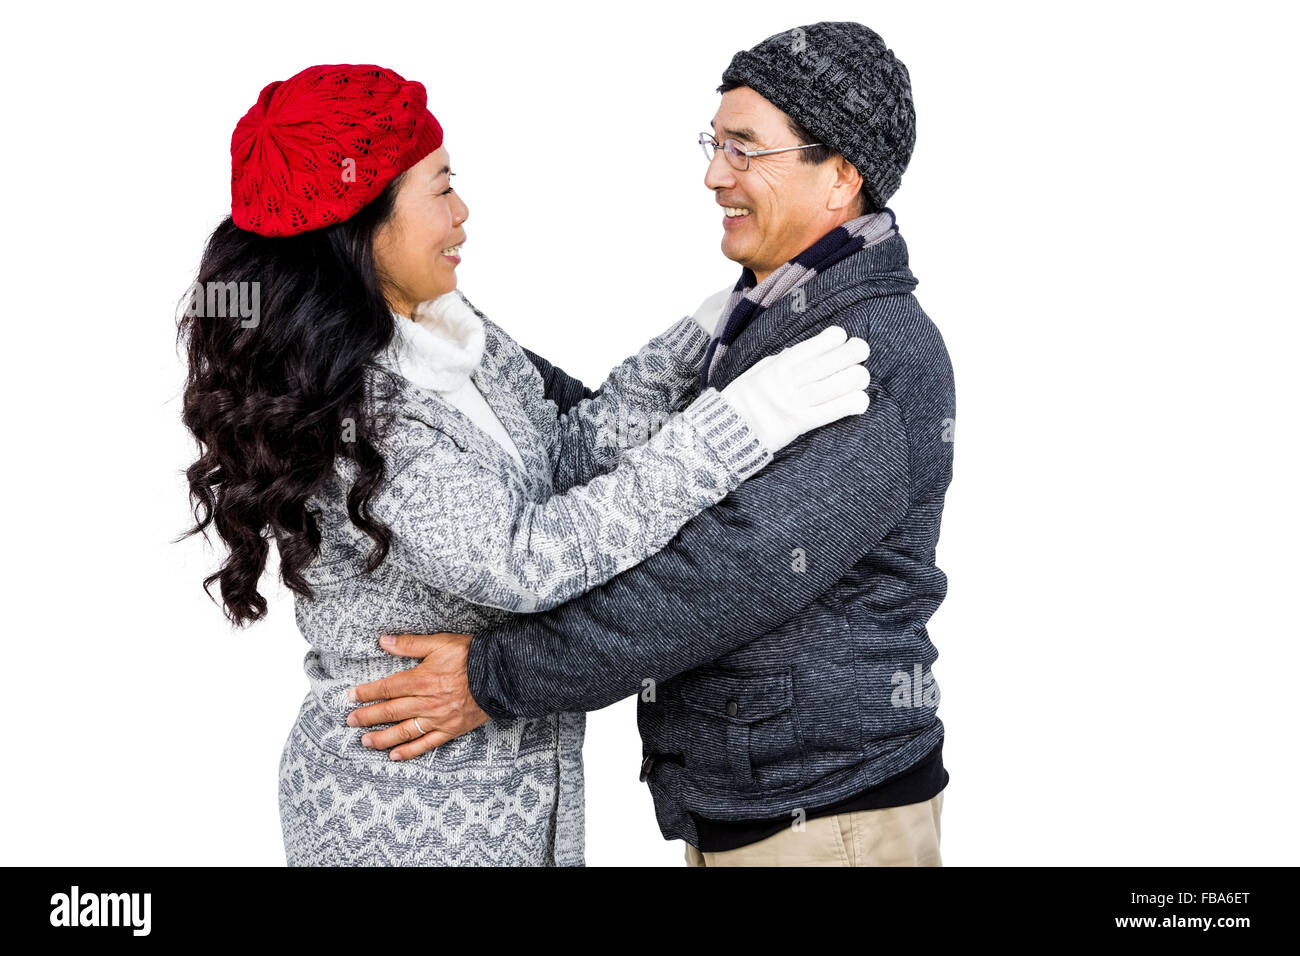 Couple embracing each other Stock Photo